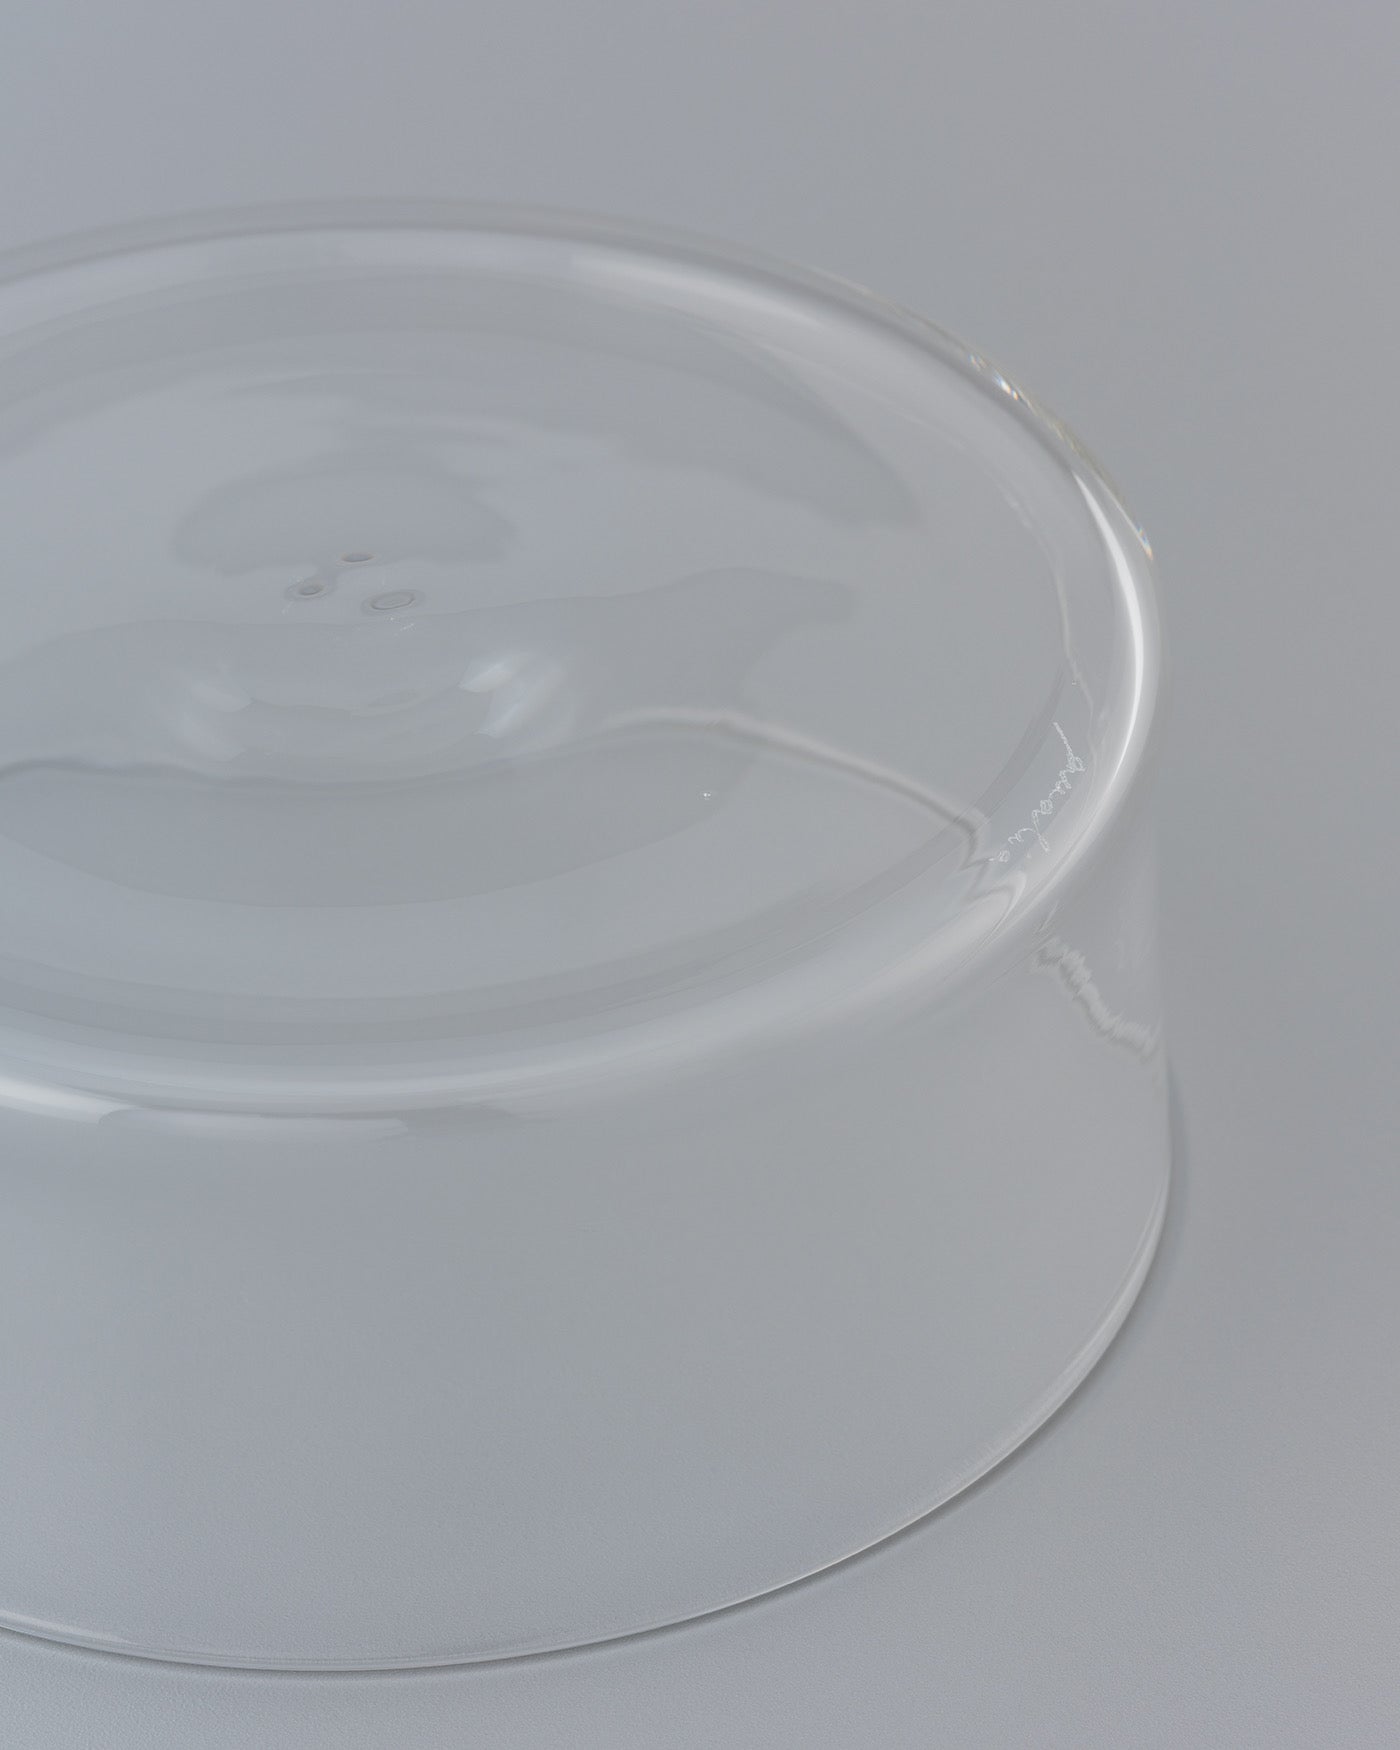 Glass Water bowl